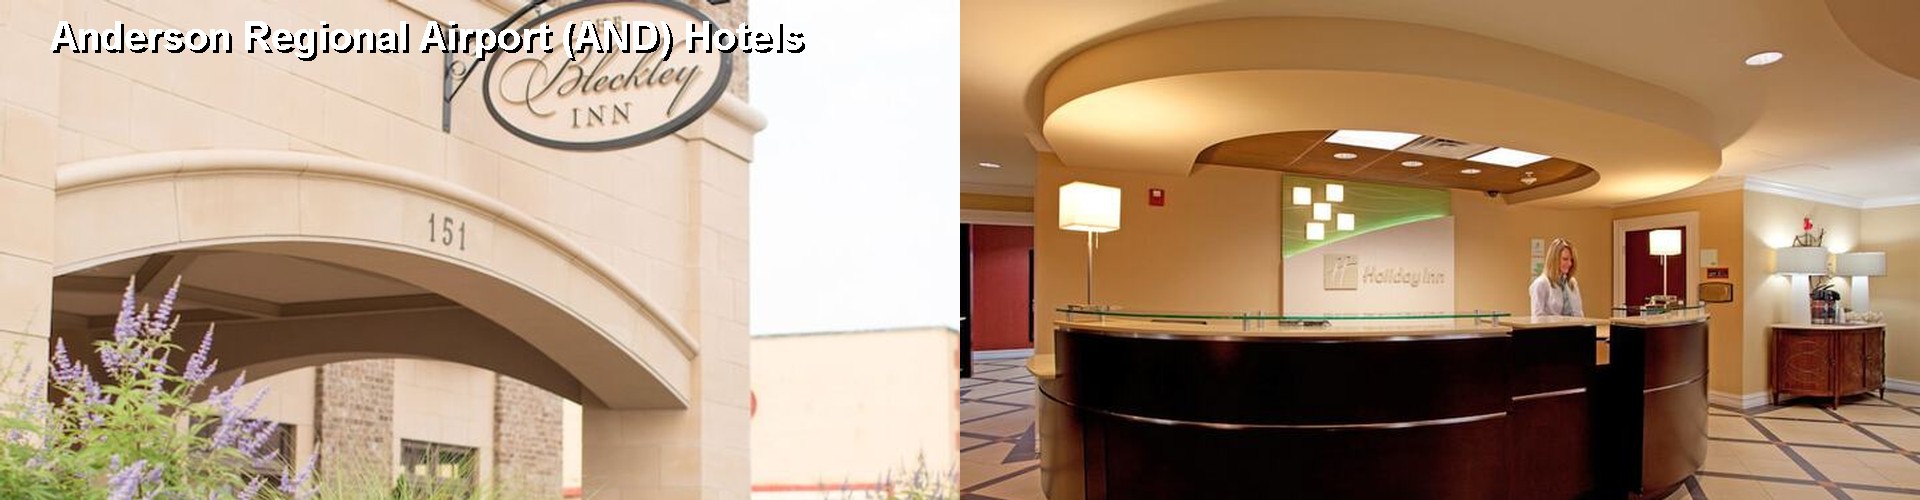 5 Best Hotels near Anderson Regional Airport (AND)